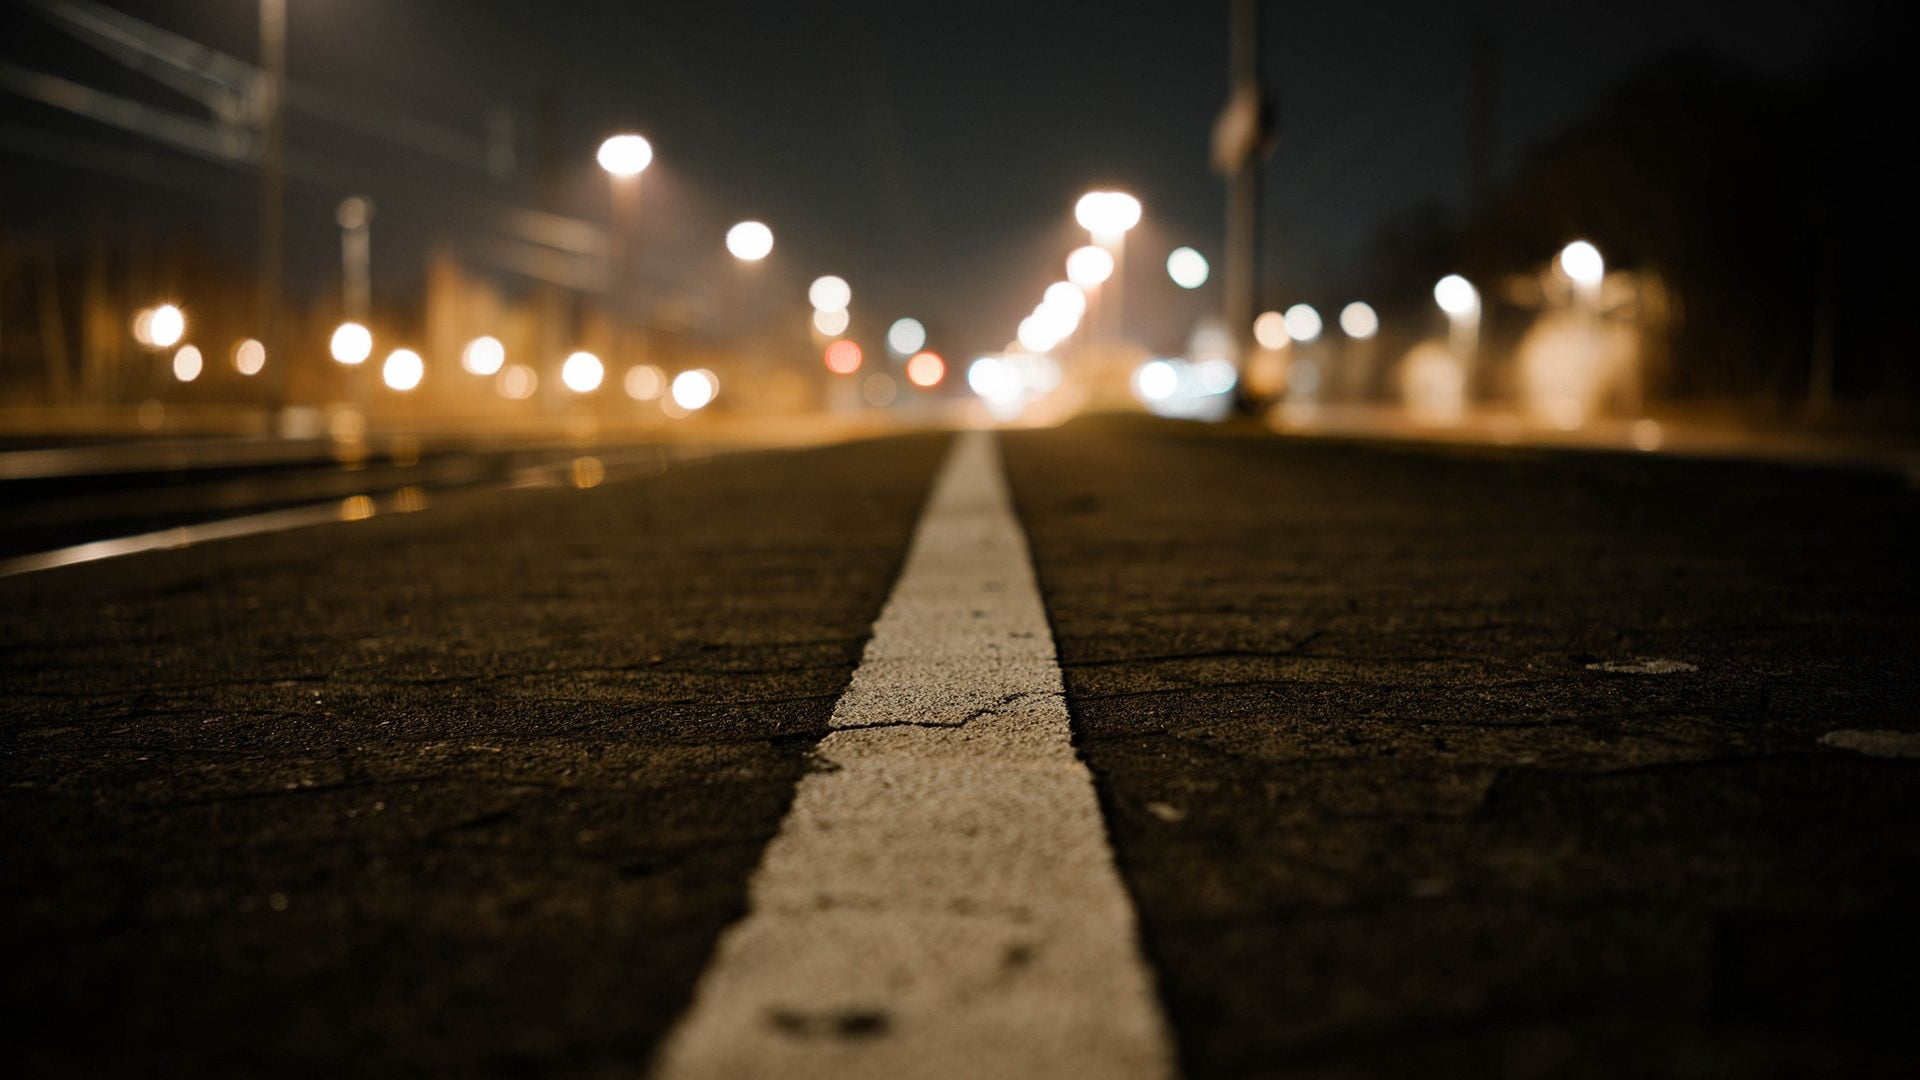 Road white line in close-up photo at night HD wallpaper | Wallpaper ...